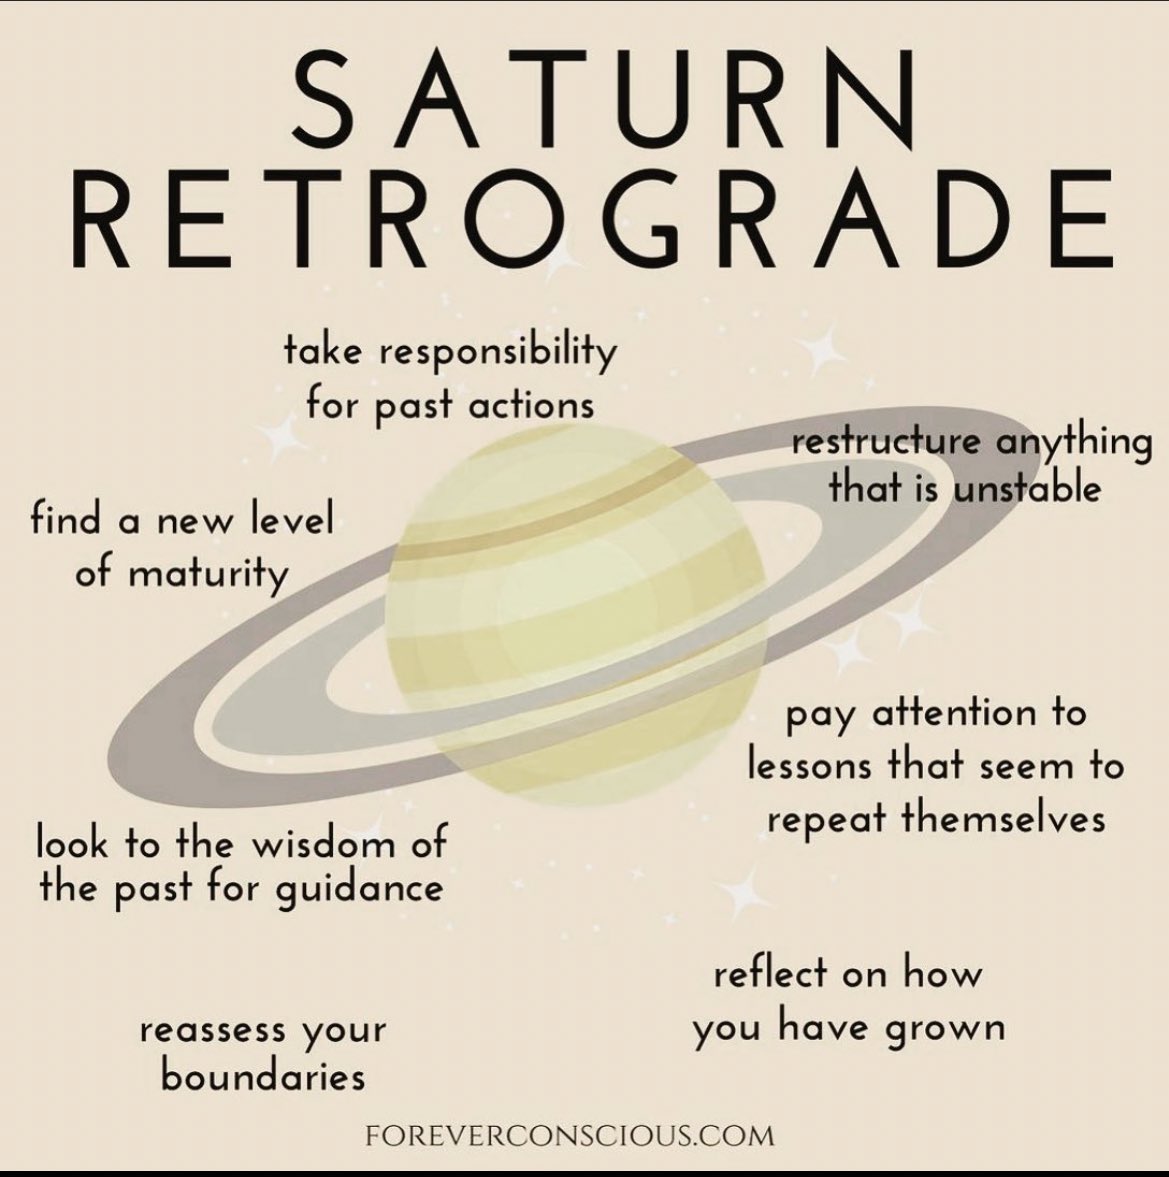 Some pointers for the Saturn retrograde 🪐💫